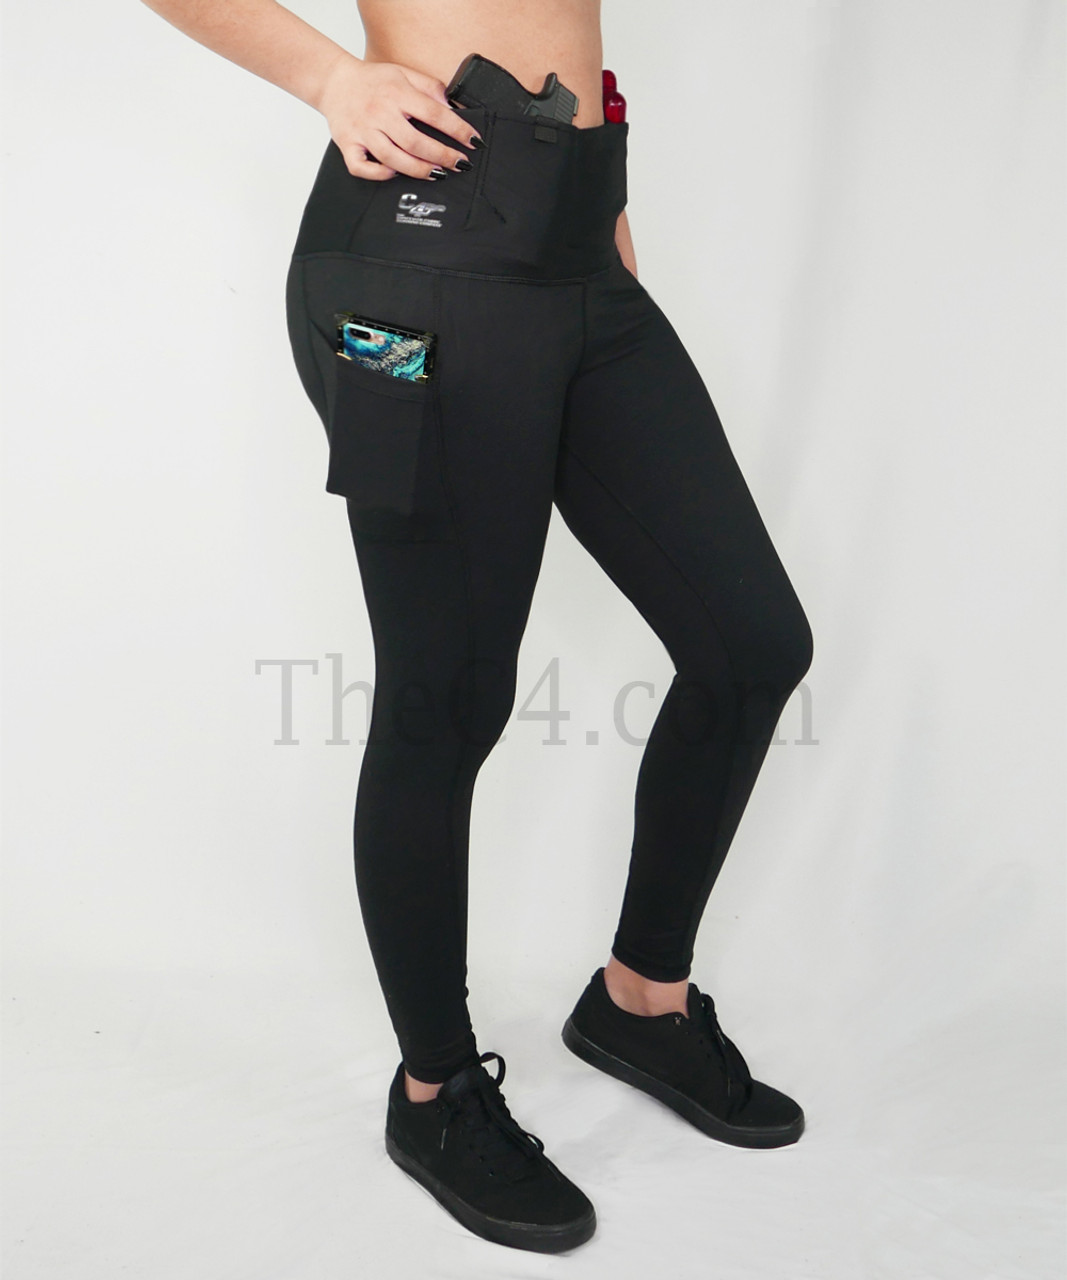 Women's Dual Holster Leggings - Concealed Carry Pants